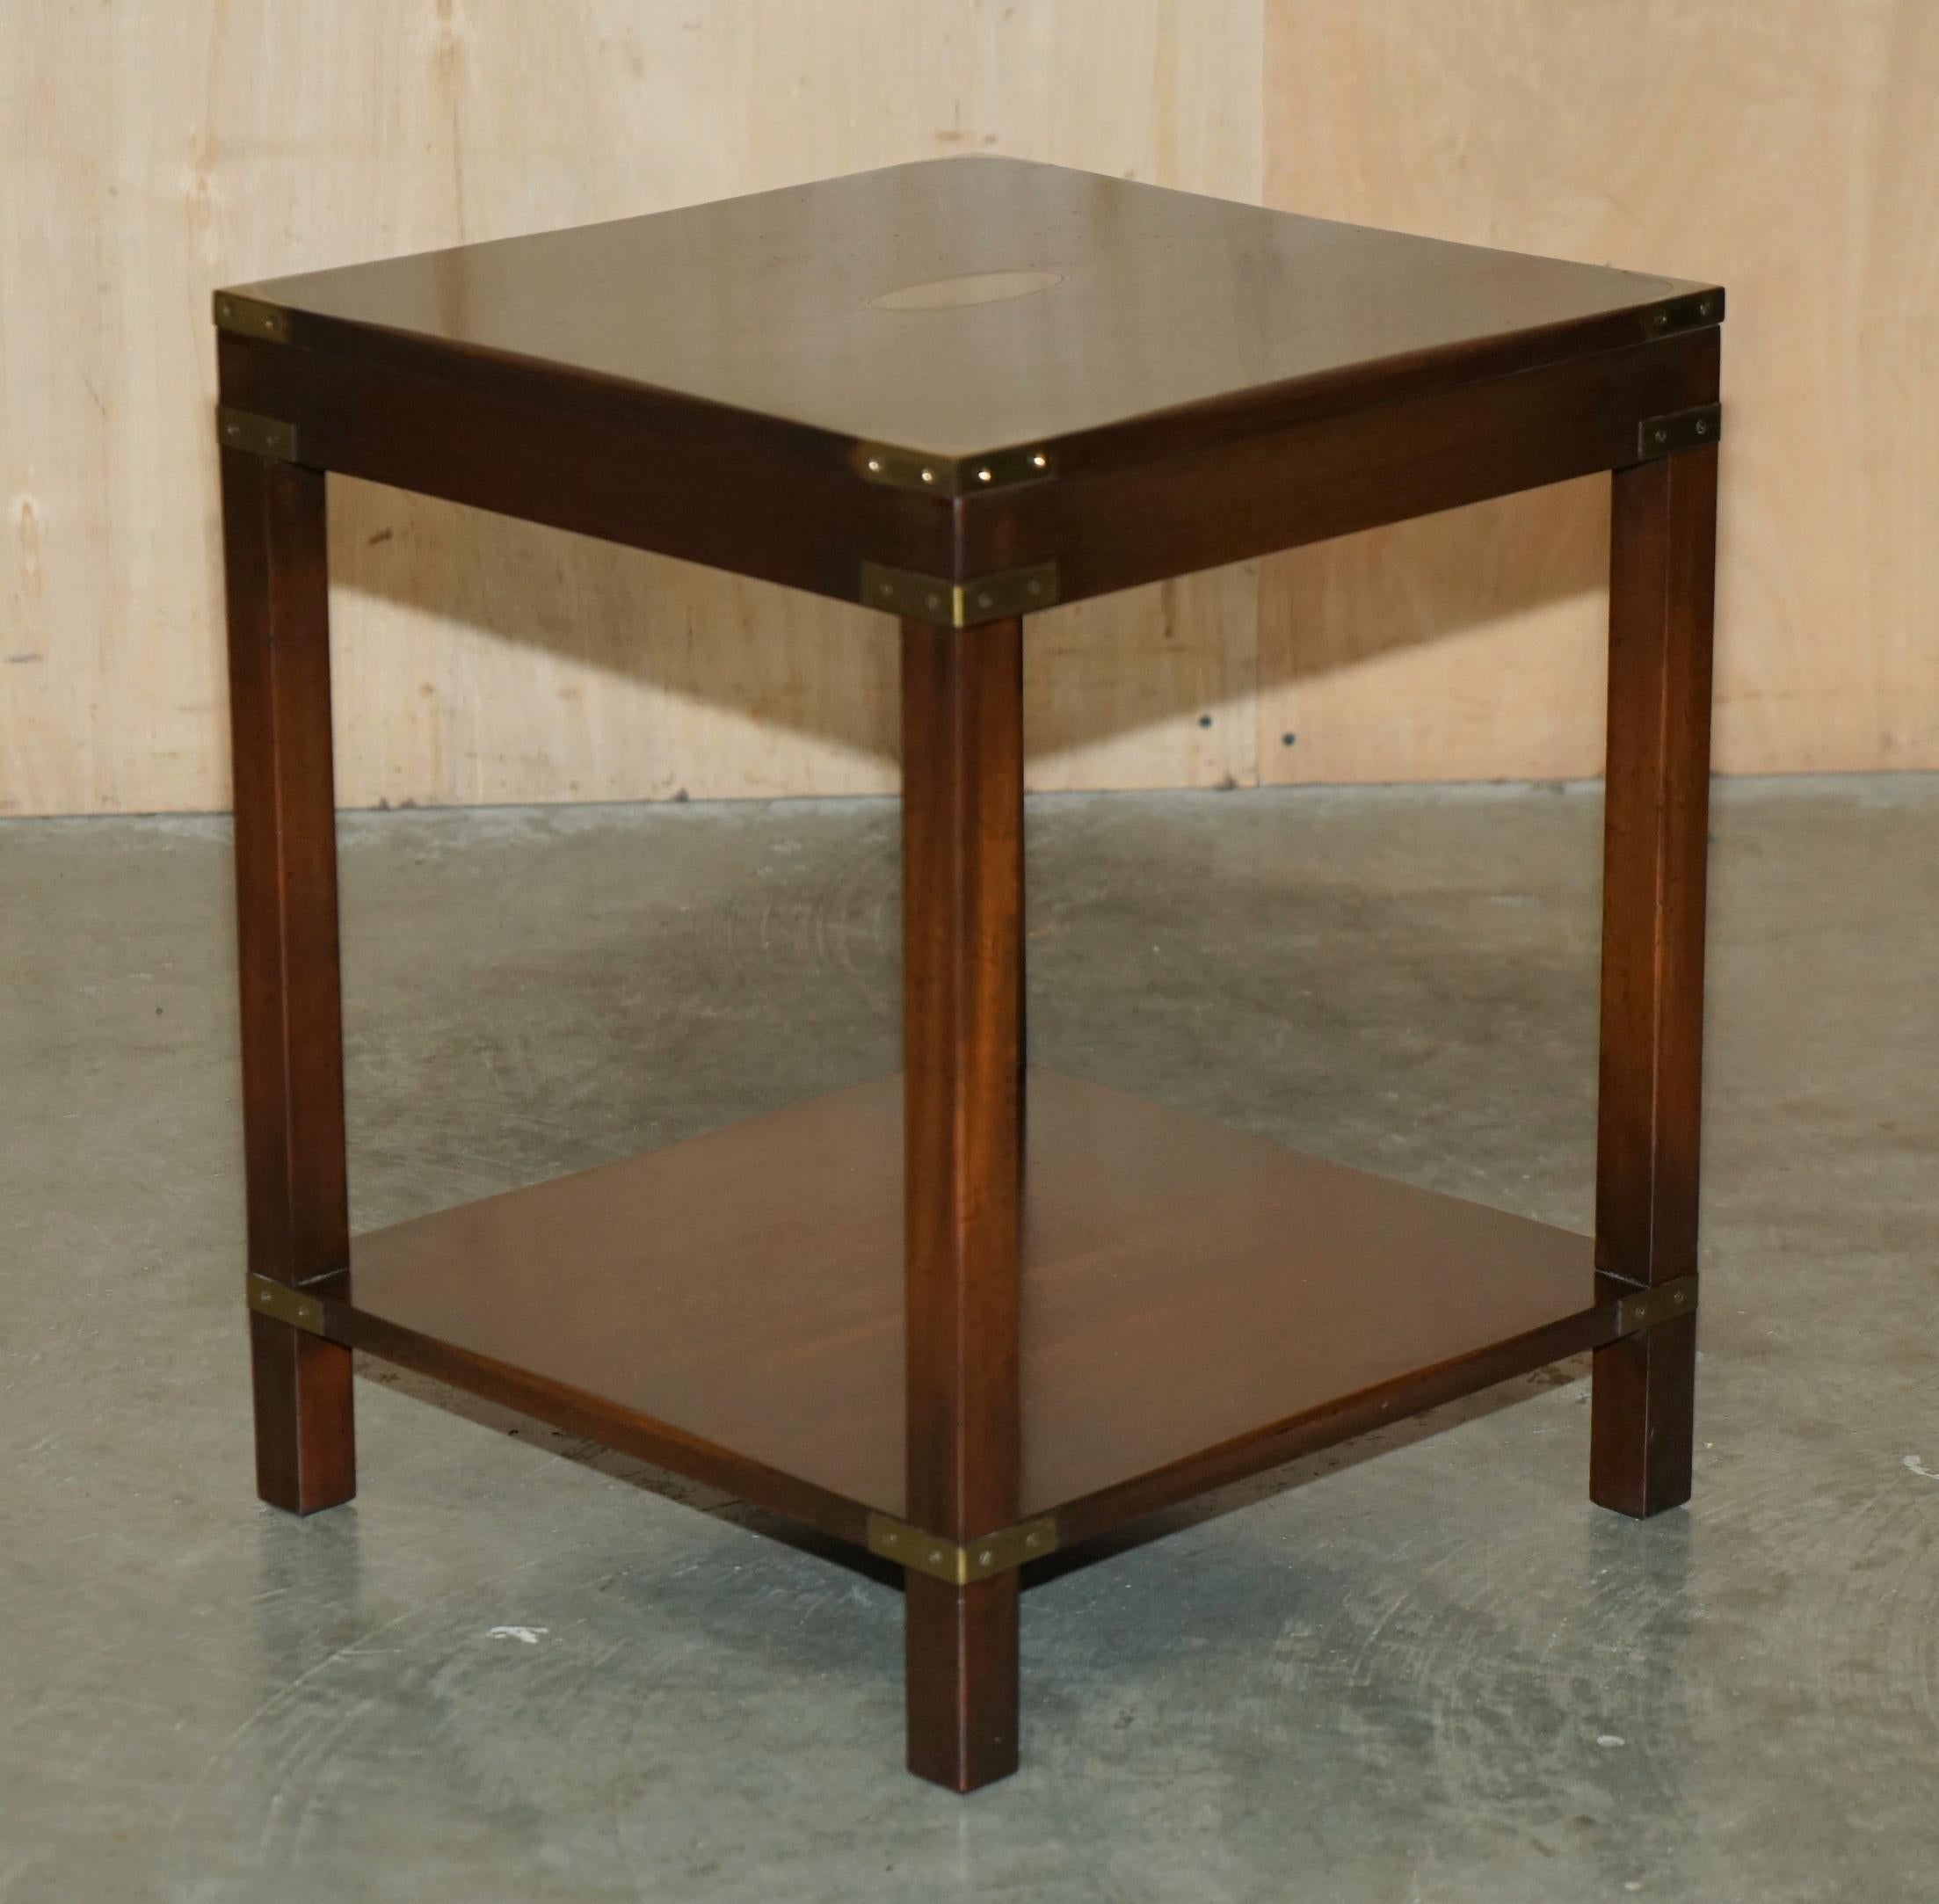 LUXURY HARRODS LONDON KENNEDY MILITARY CAMPAIGN HiGH SIDE END TABLE HARDWOOD For Sale 2